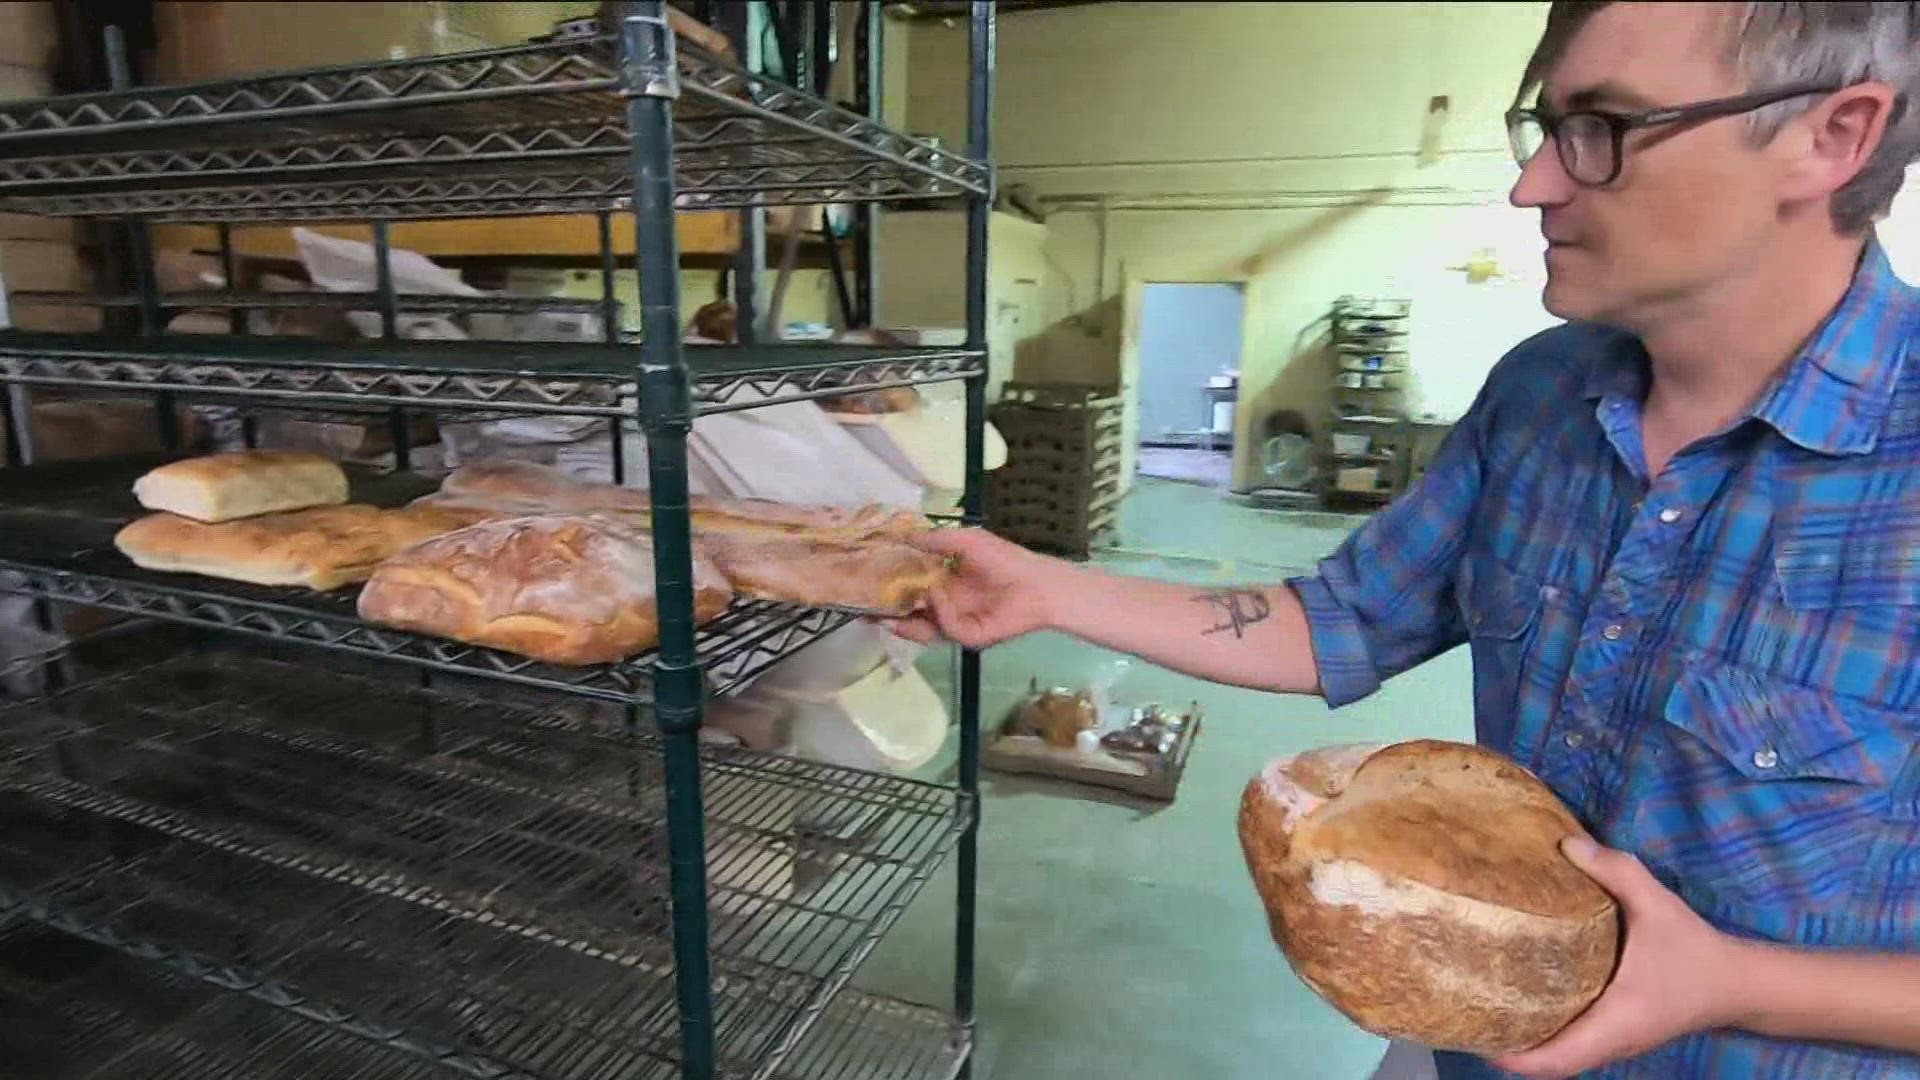 Acme Bakery sells bread to more than 50 local restaurants, coffee shops, and food trucks.